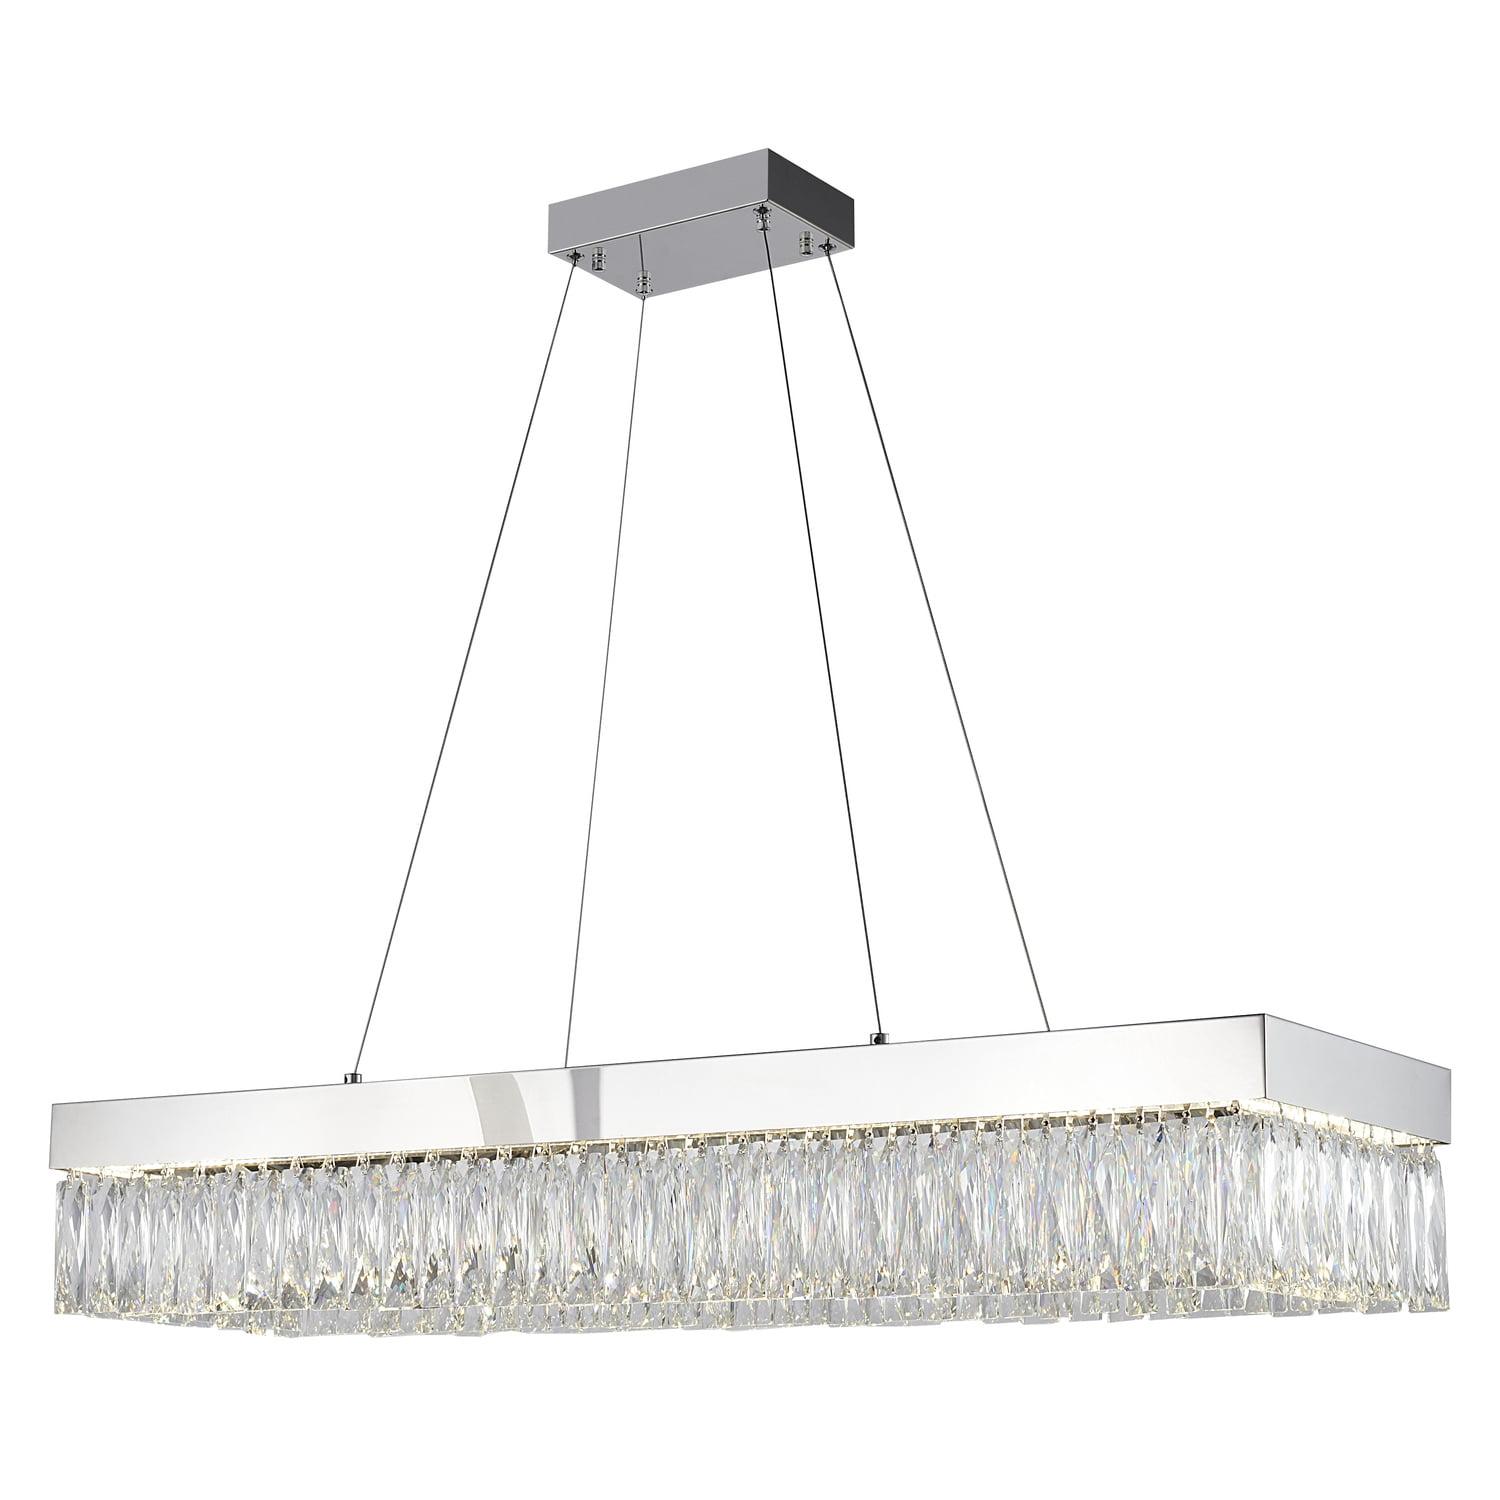 Exquisite Rectangular Chrome LED Chandelier with Crystal Accents